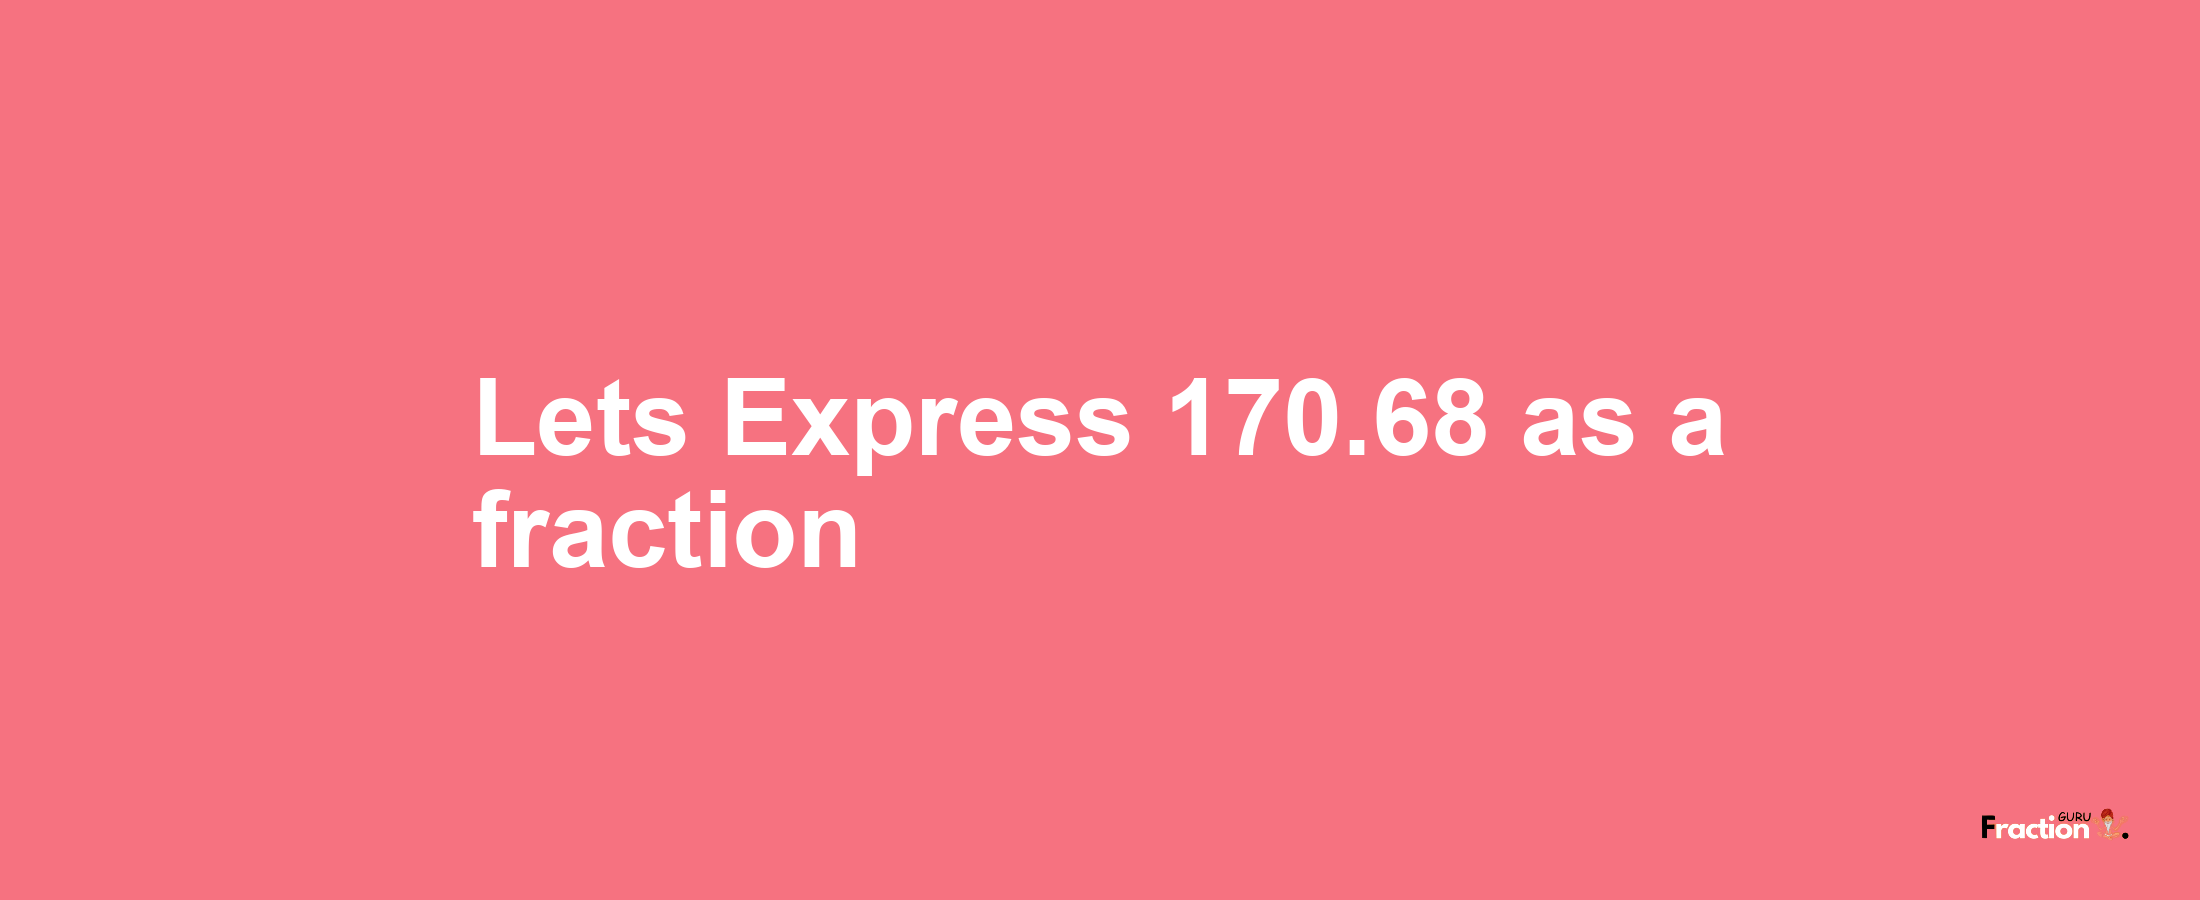 Lets Express 170.68 as afraction